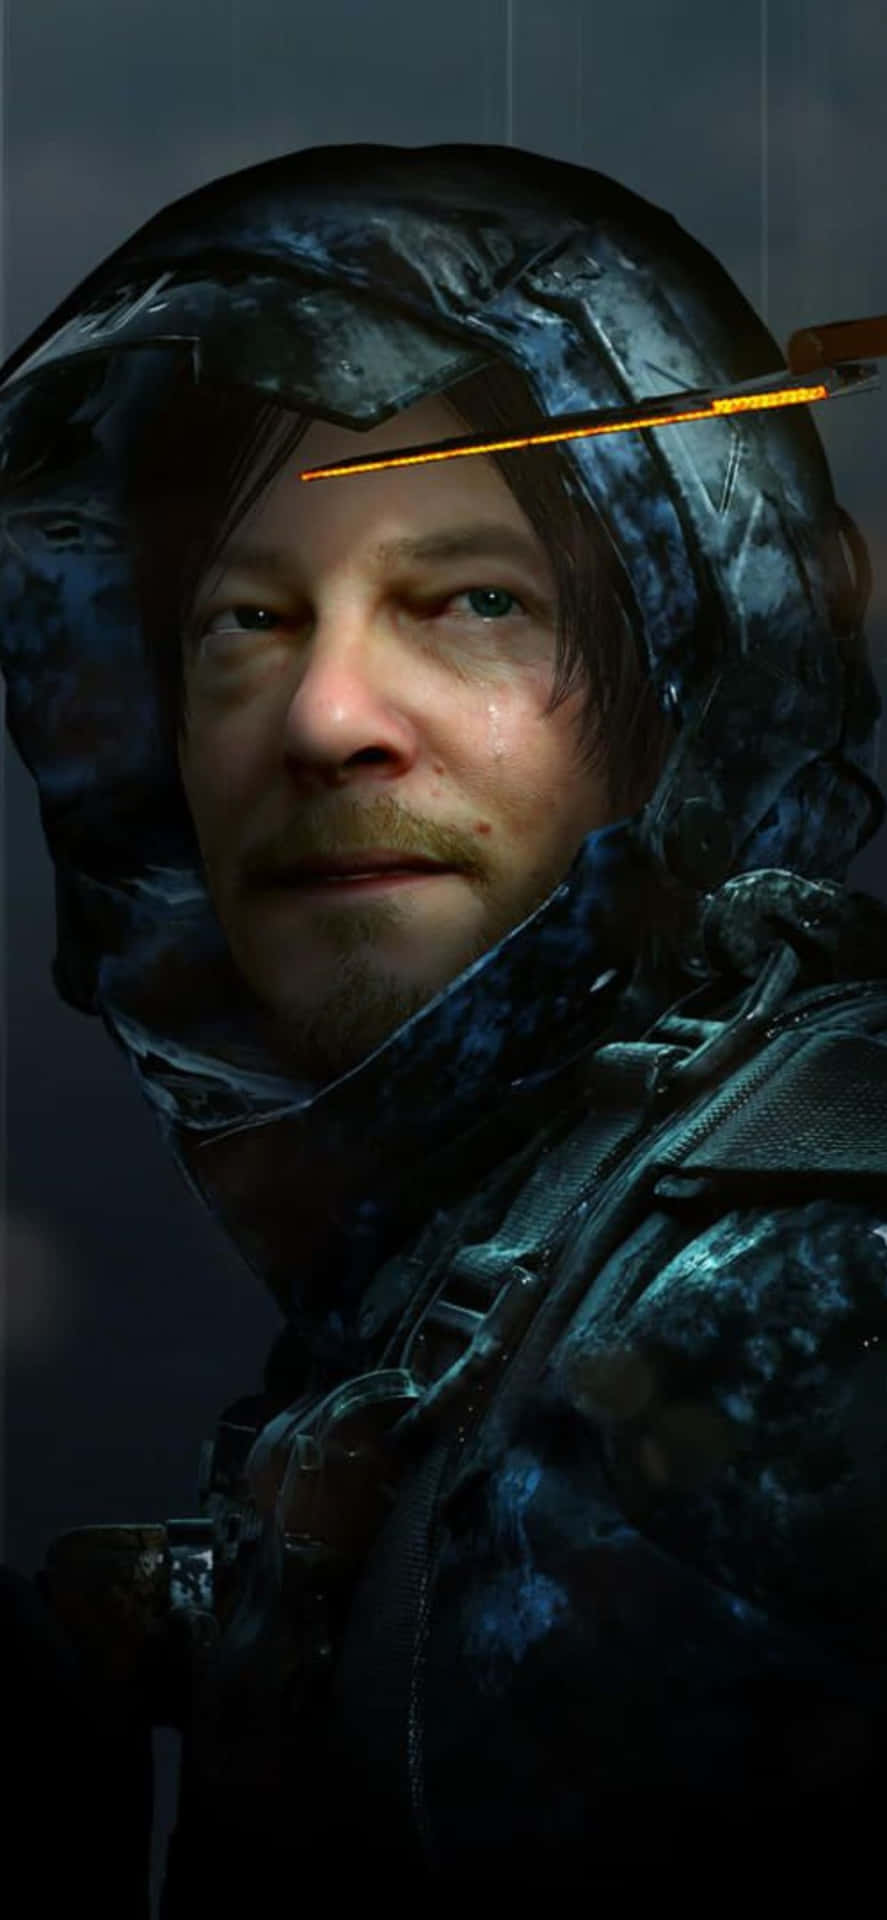 Journey Into the Unknown With The Iphone Xs Max and Death Stranding